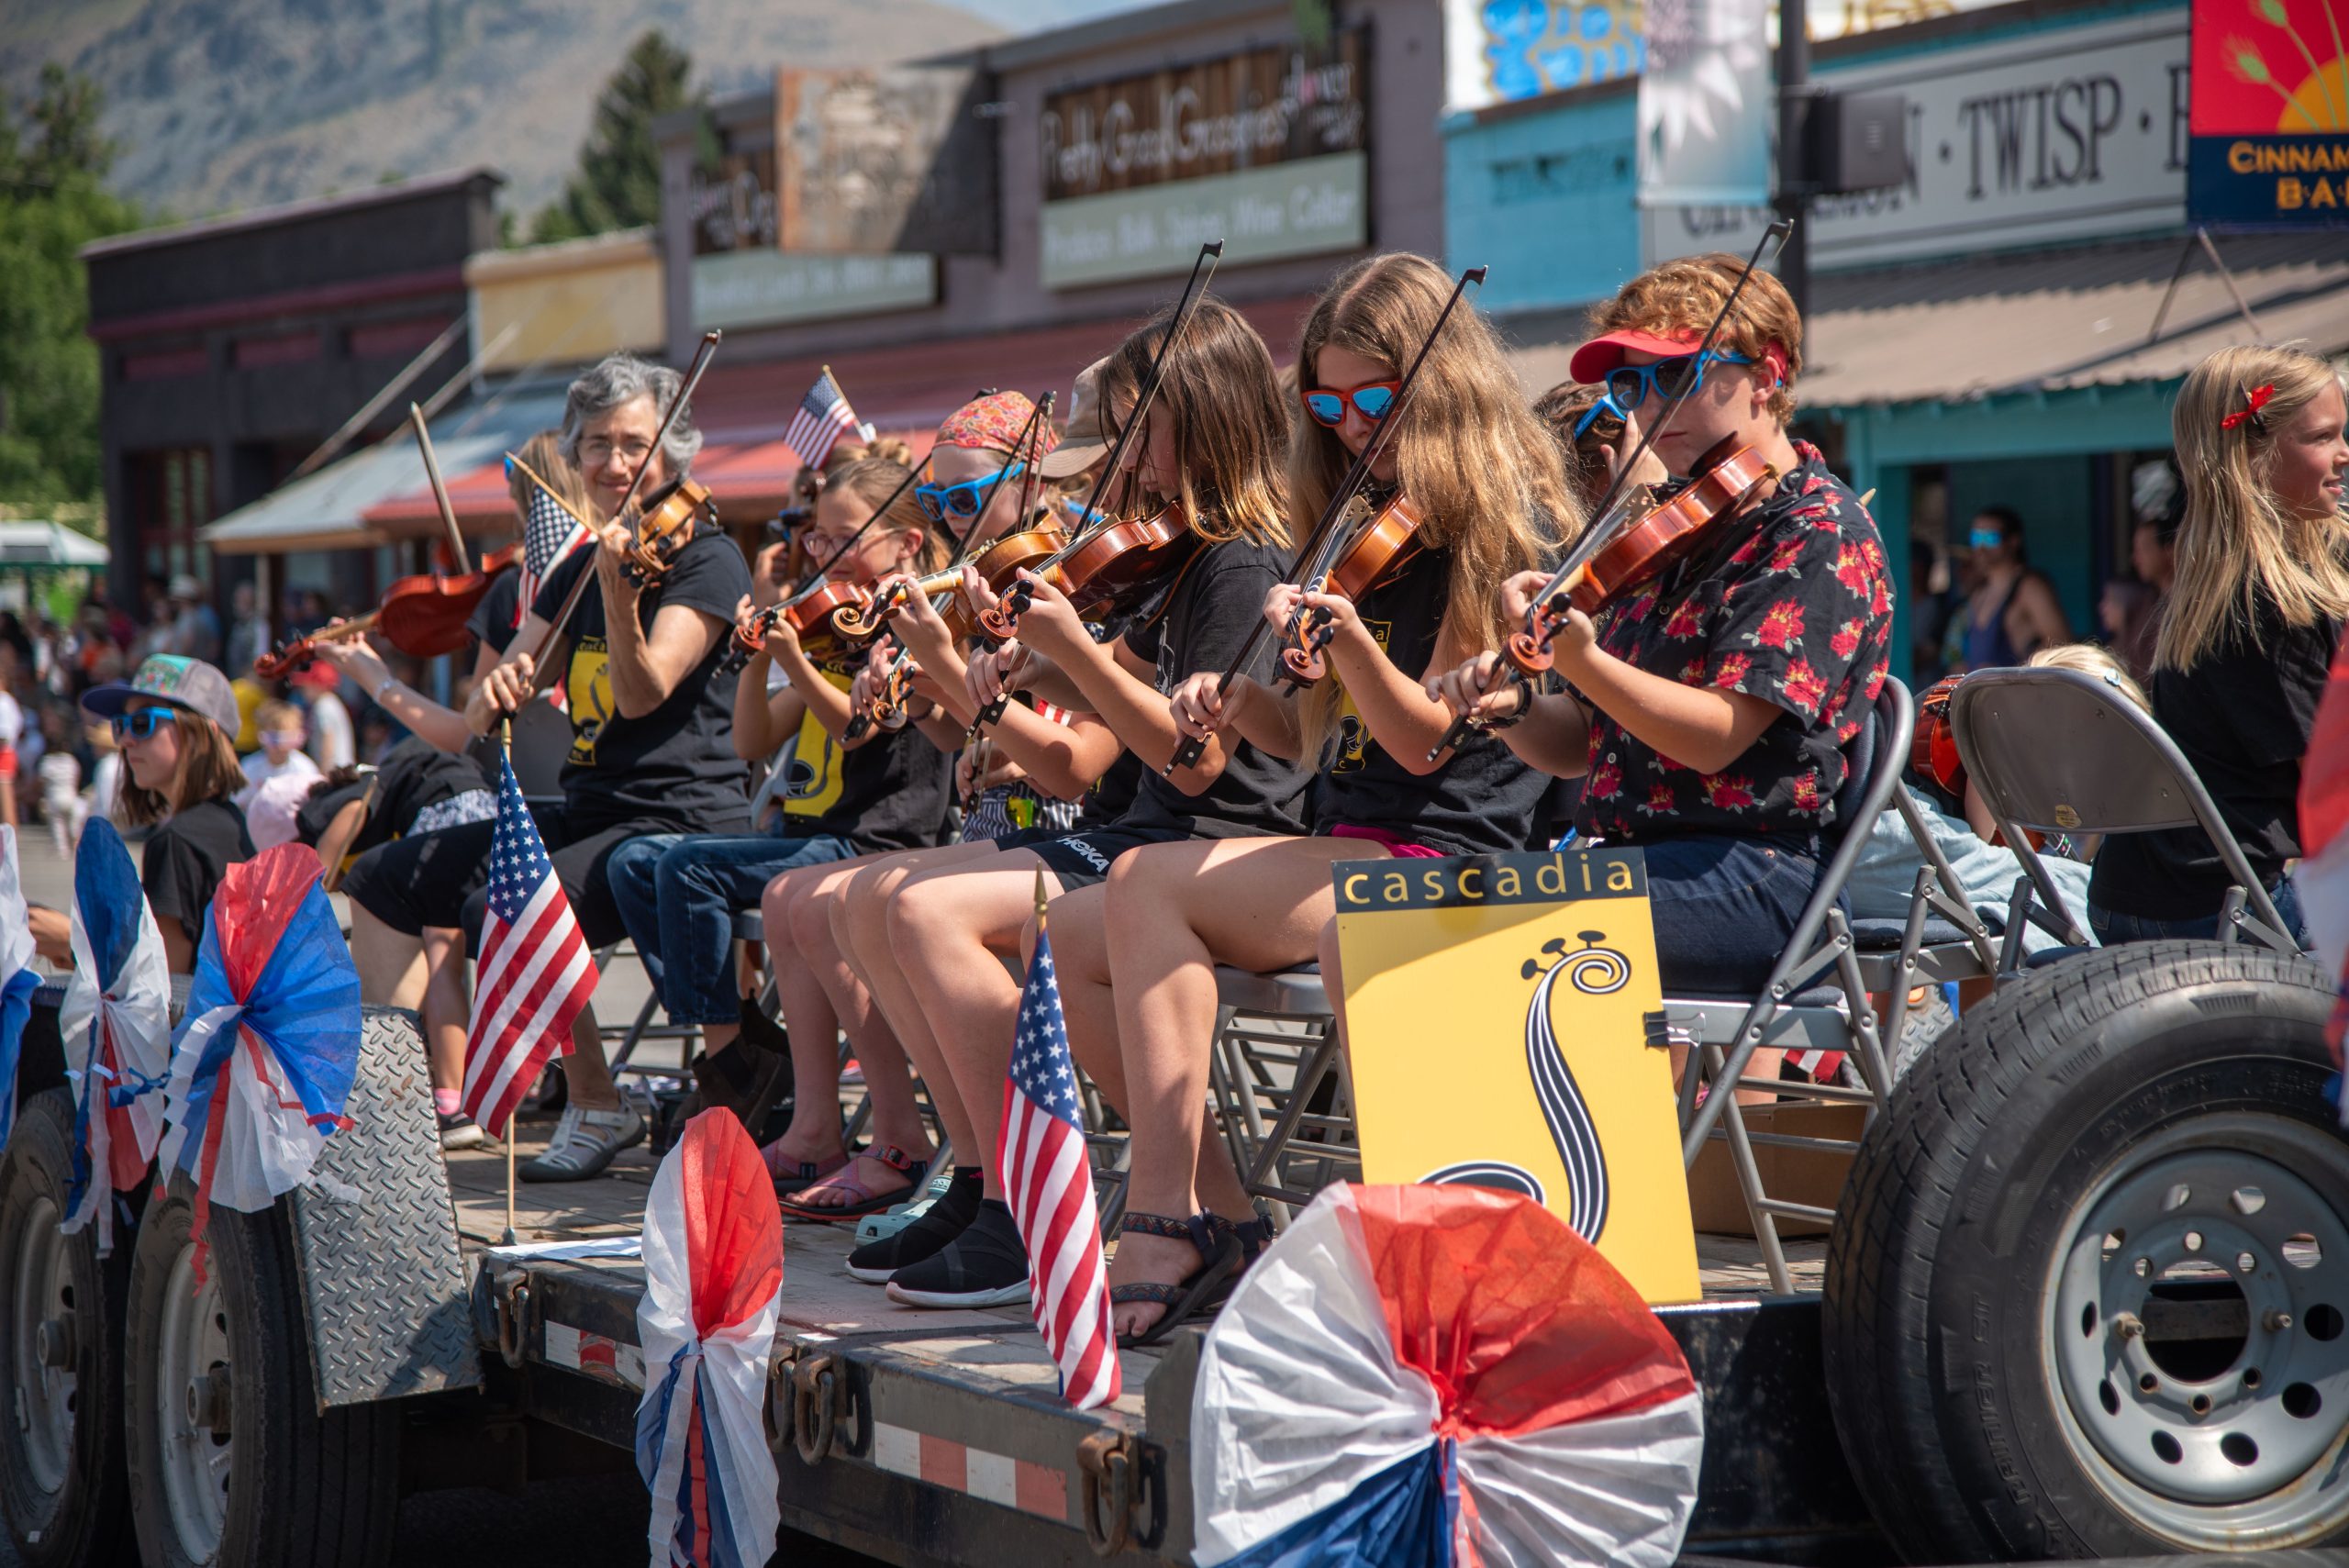 In the middle of a parade, a line of children sitting in chairs with sunglasses play the violin for the crowd.